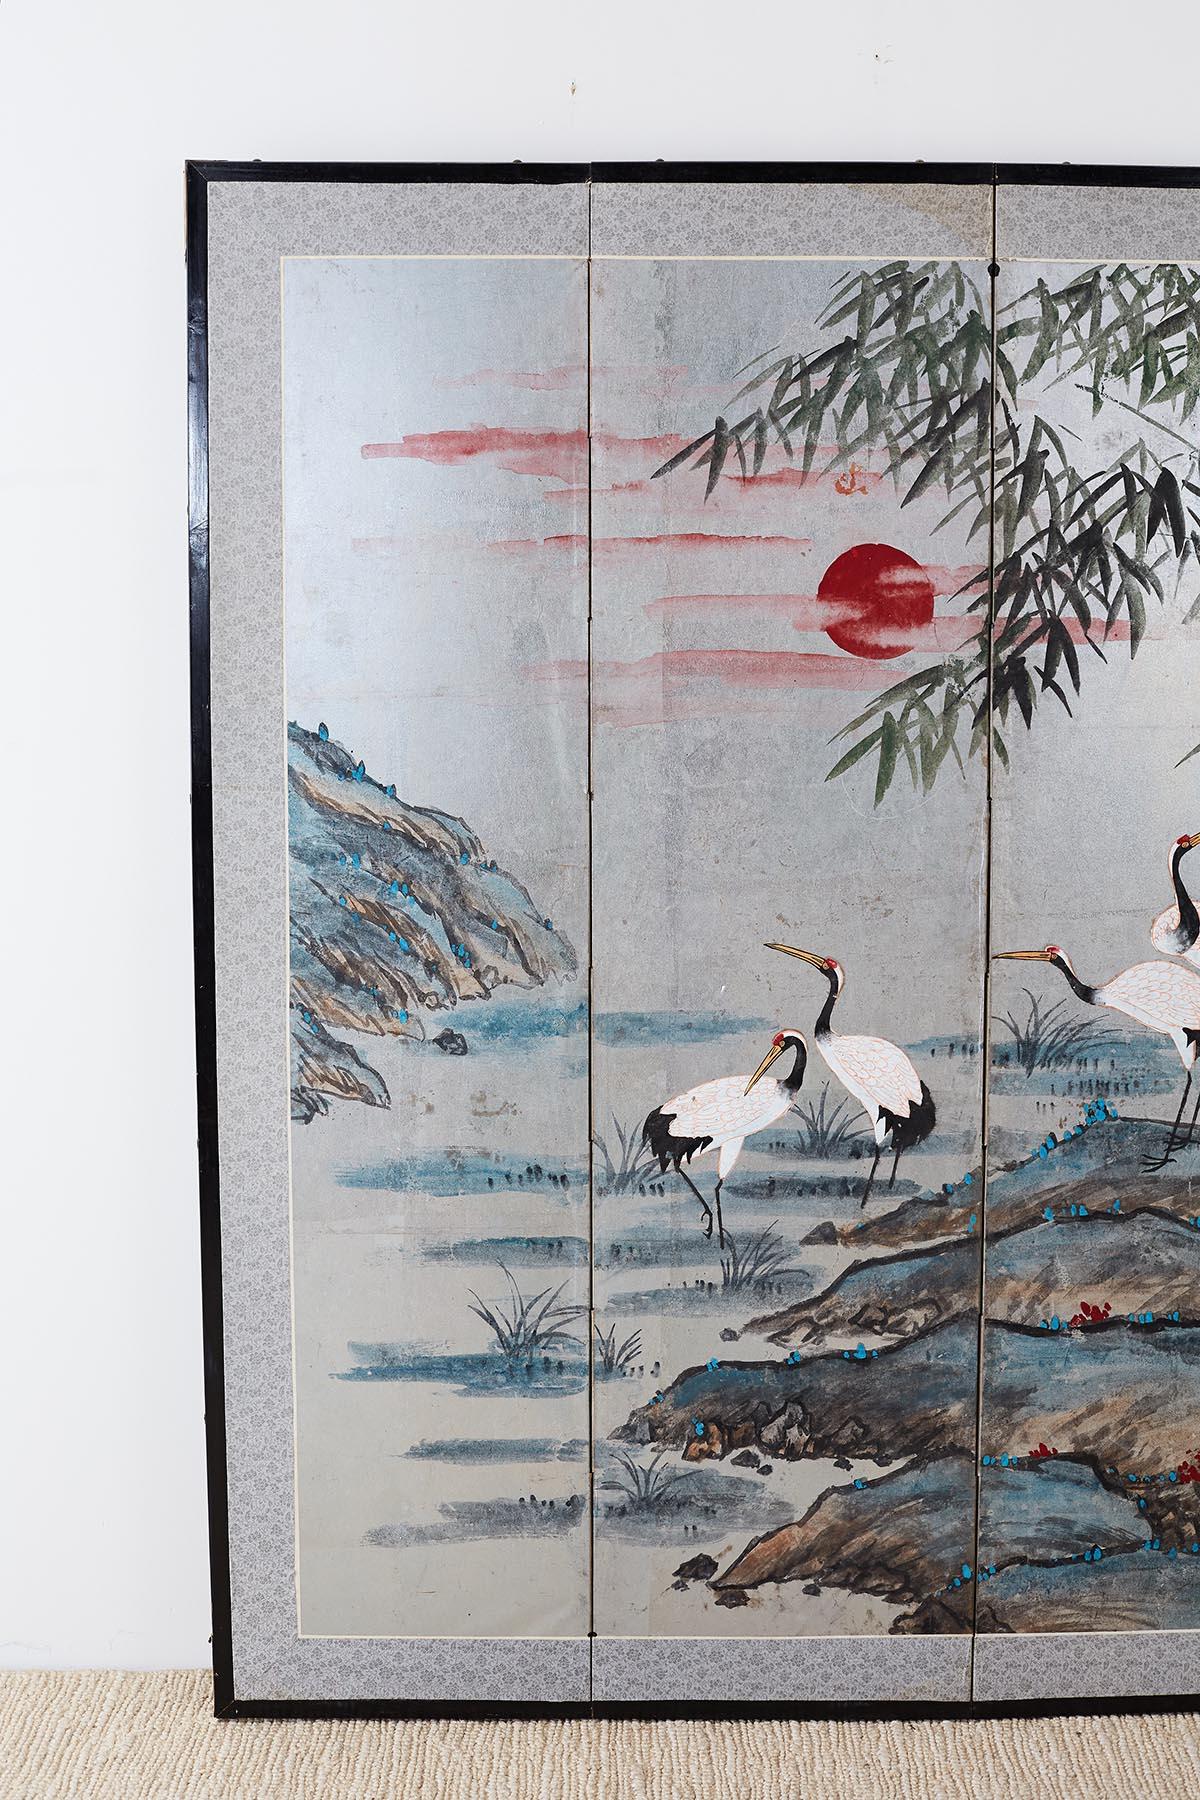 Colorful Japanese four-panel screen made in the kano school style depicting five Manchurian cranes or red-crowned cranes. Interesting landscape with a setting red sun and vivid blue colors. Four panel screen probably cut down from a six panel screen